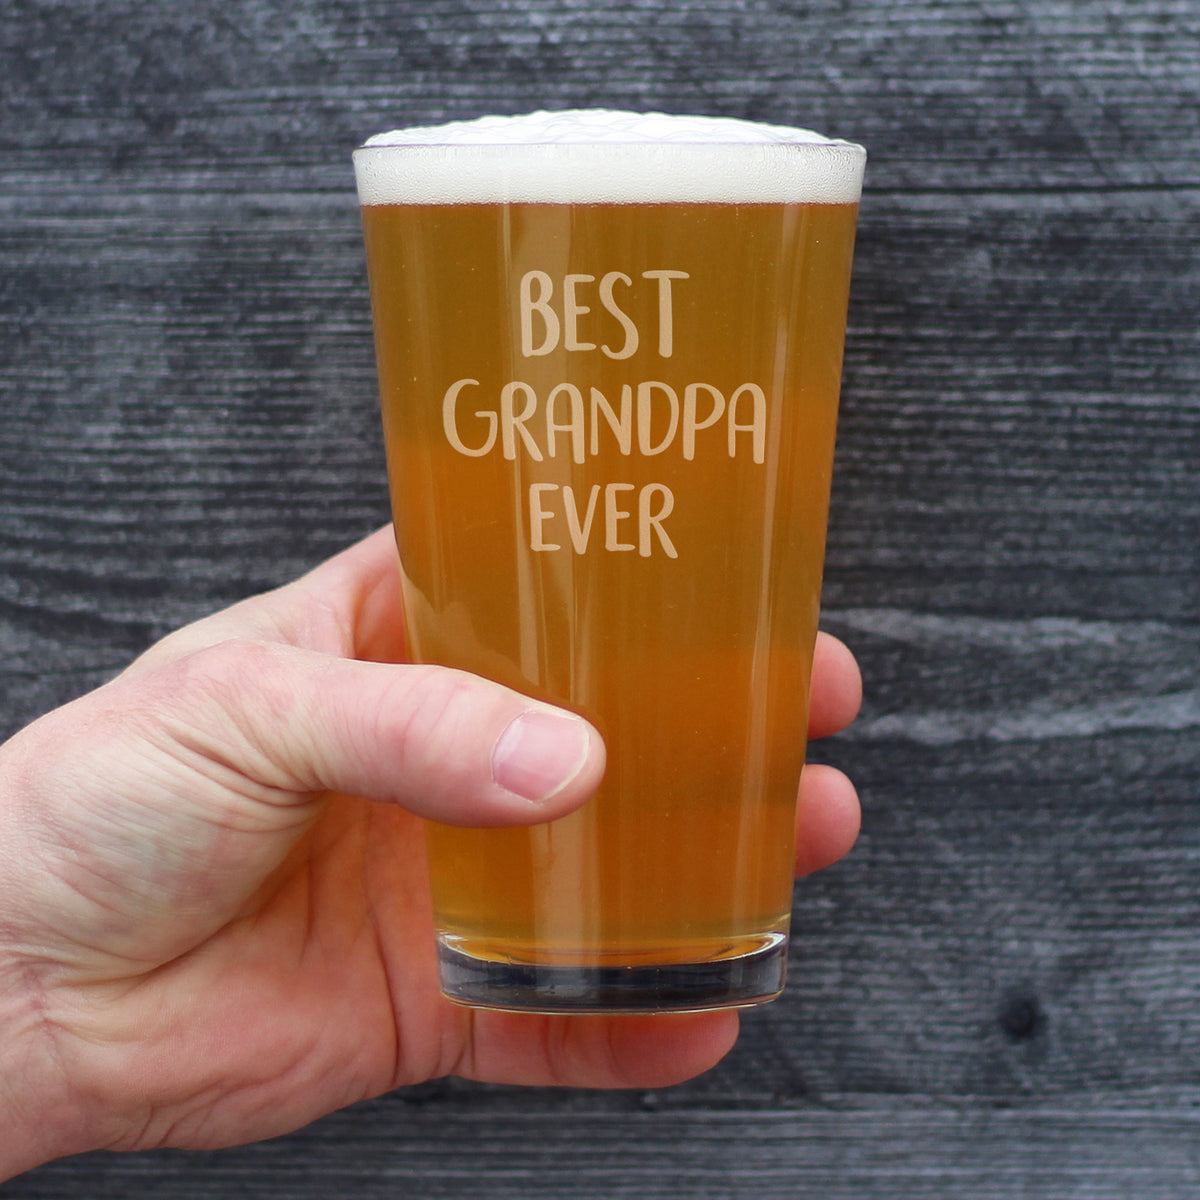 Best Grandpa Ever - 16 oz Pint Glass for Beer - Fun Drinking Gifts for Grandfathers - Cute Glassware for Grandparents